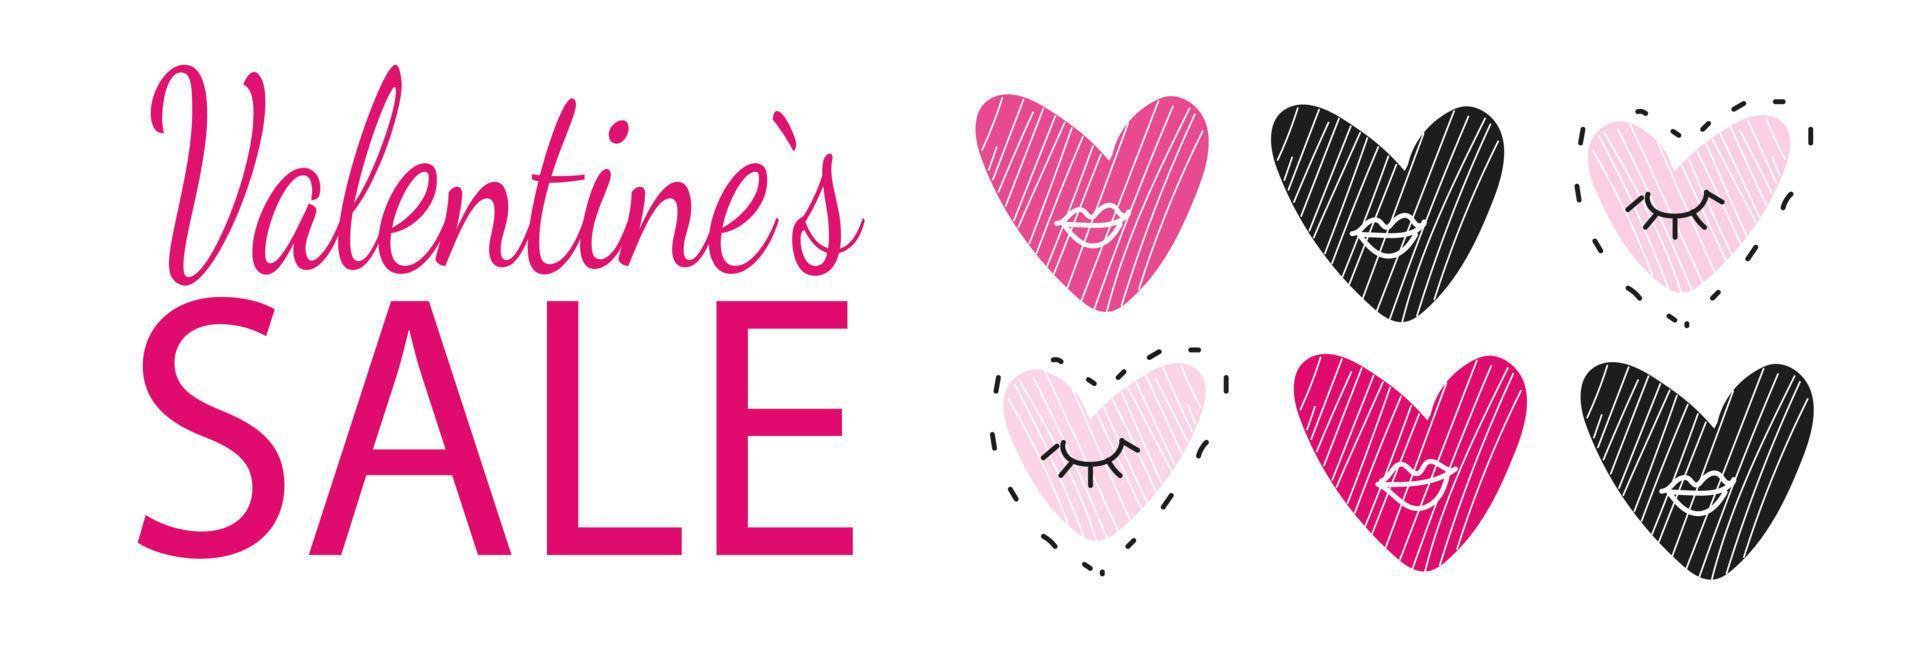 Happy valentine day  horizontal doodle hand drawn banner vector